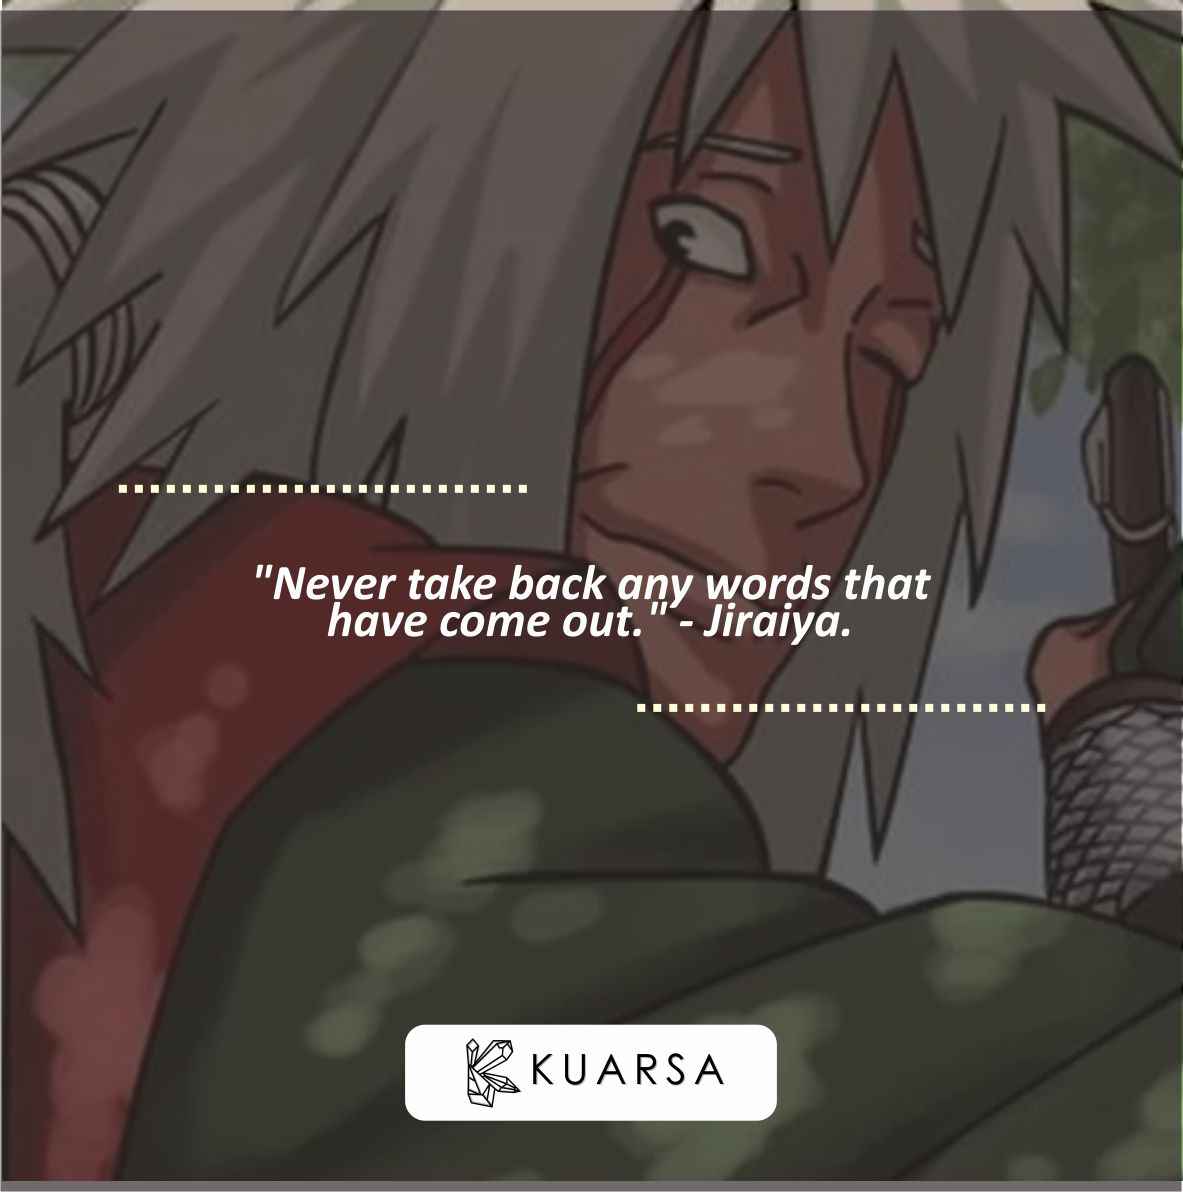 +710 Best Quotes from All Characters in the Anime Naruto (English Language)